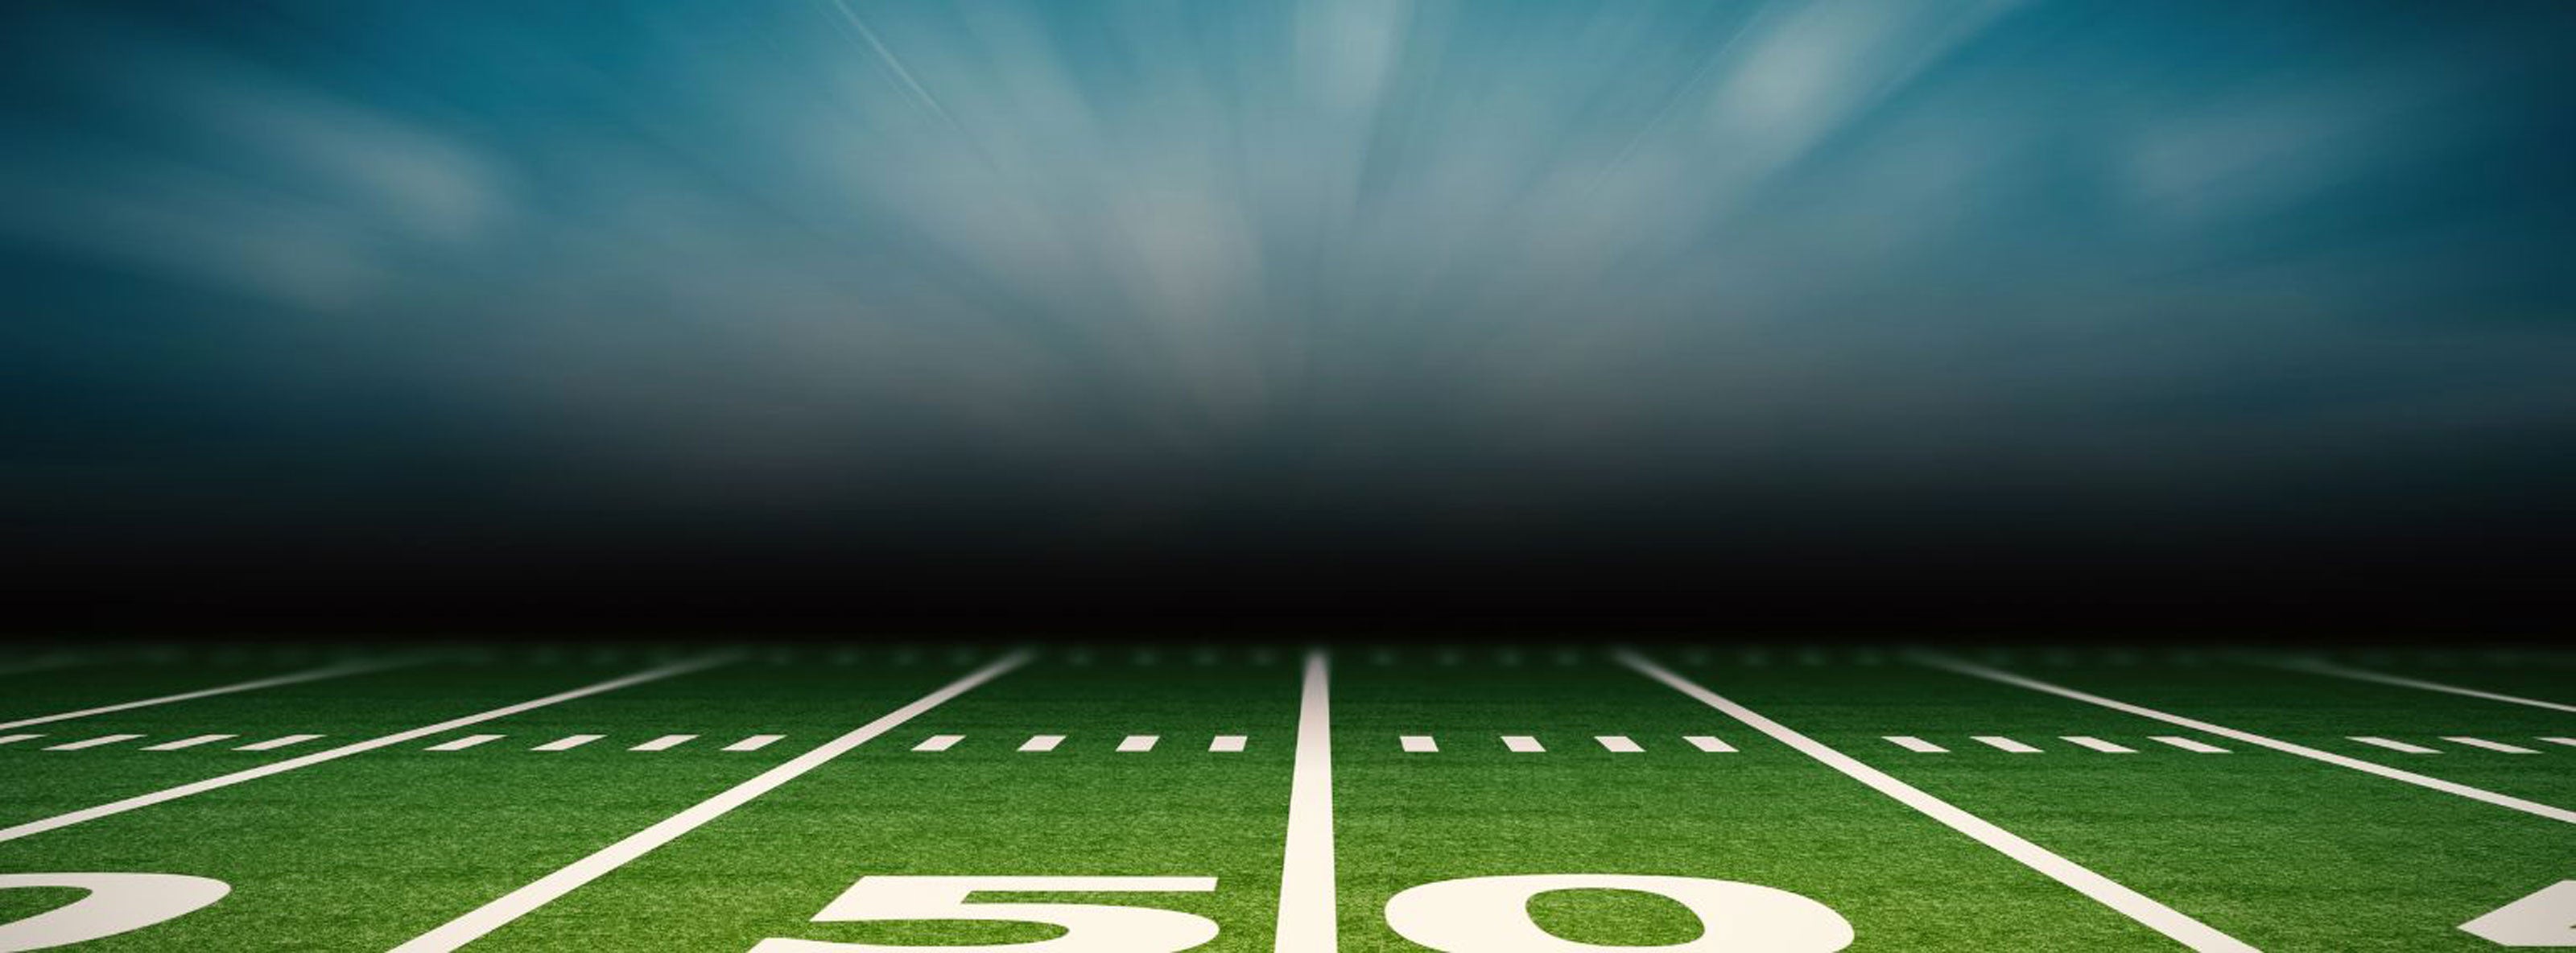 an image of a football field from the 50-yard line